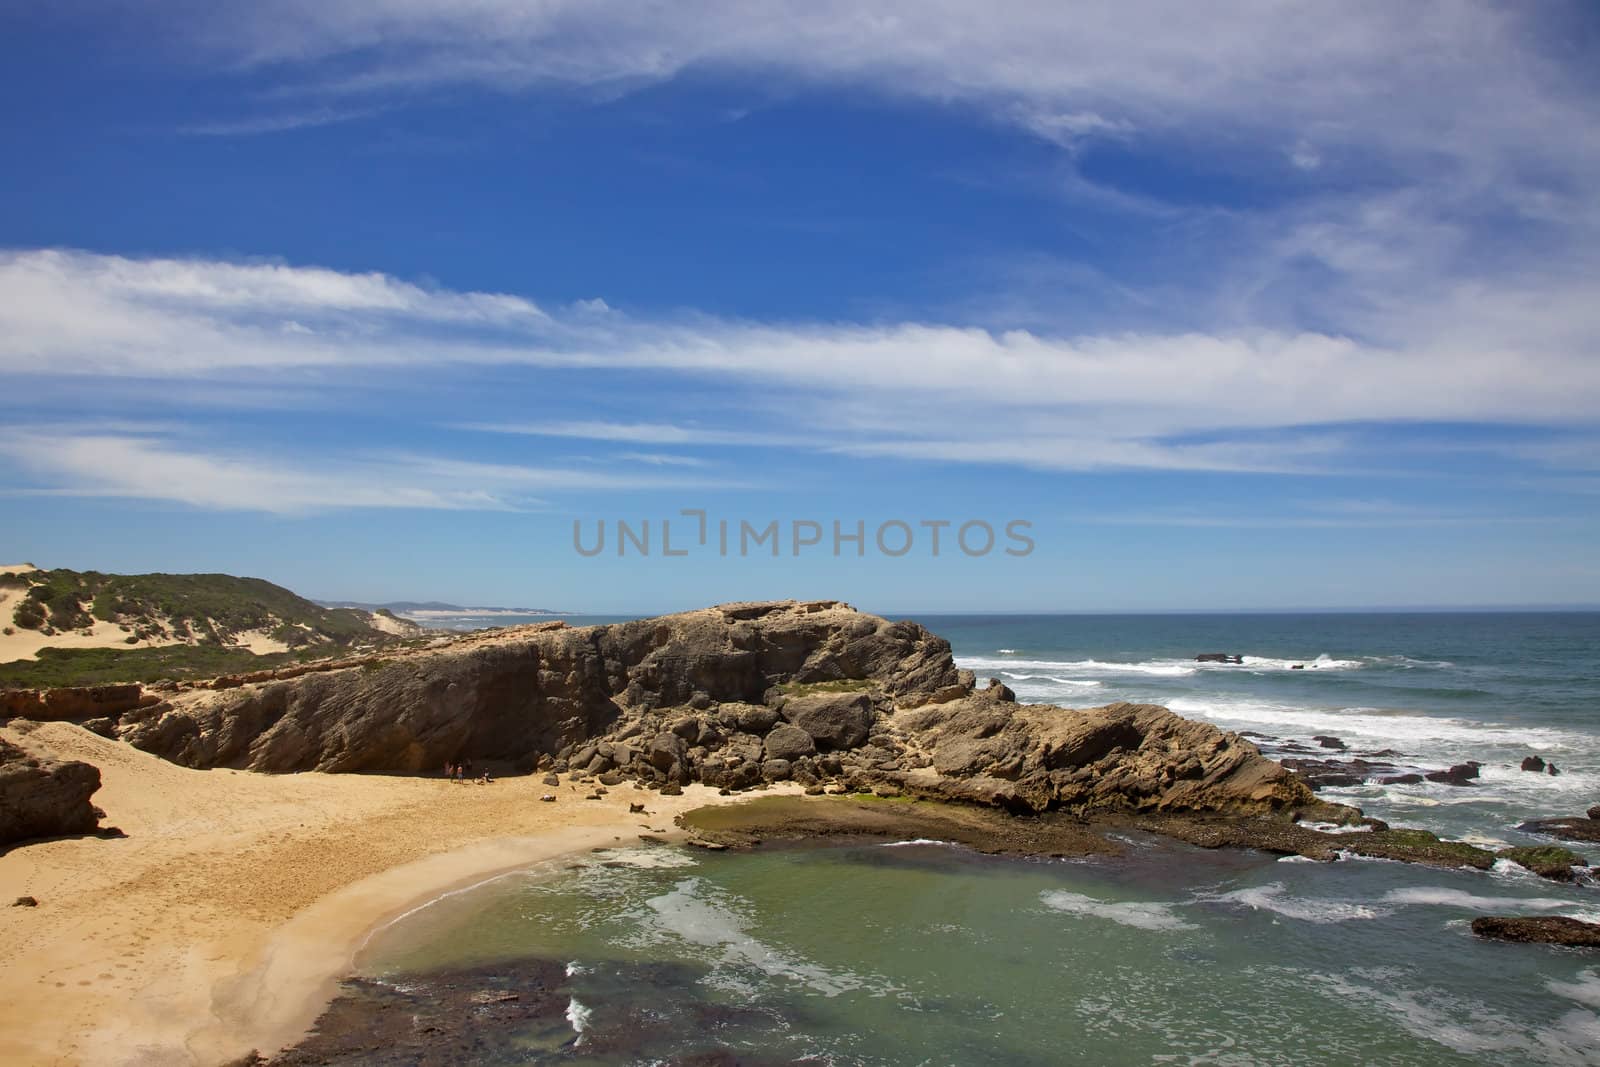 Shelley Bay, a popular tidal pool at Kenton-on-Sea, in South Africa's Eastern Cape.